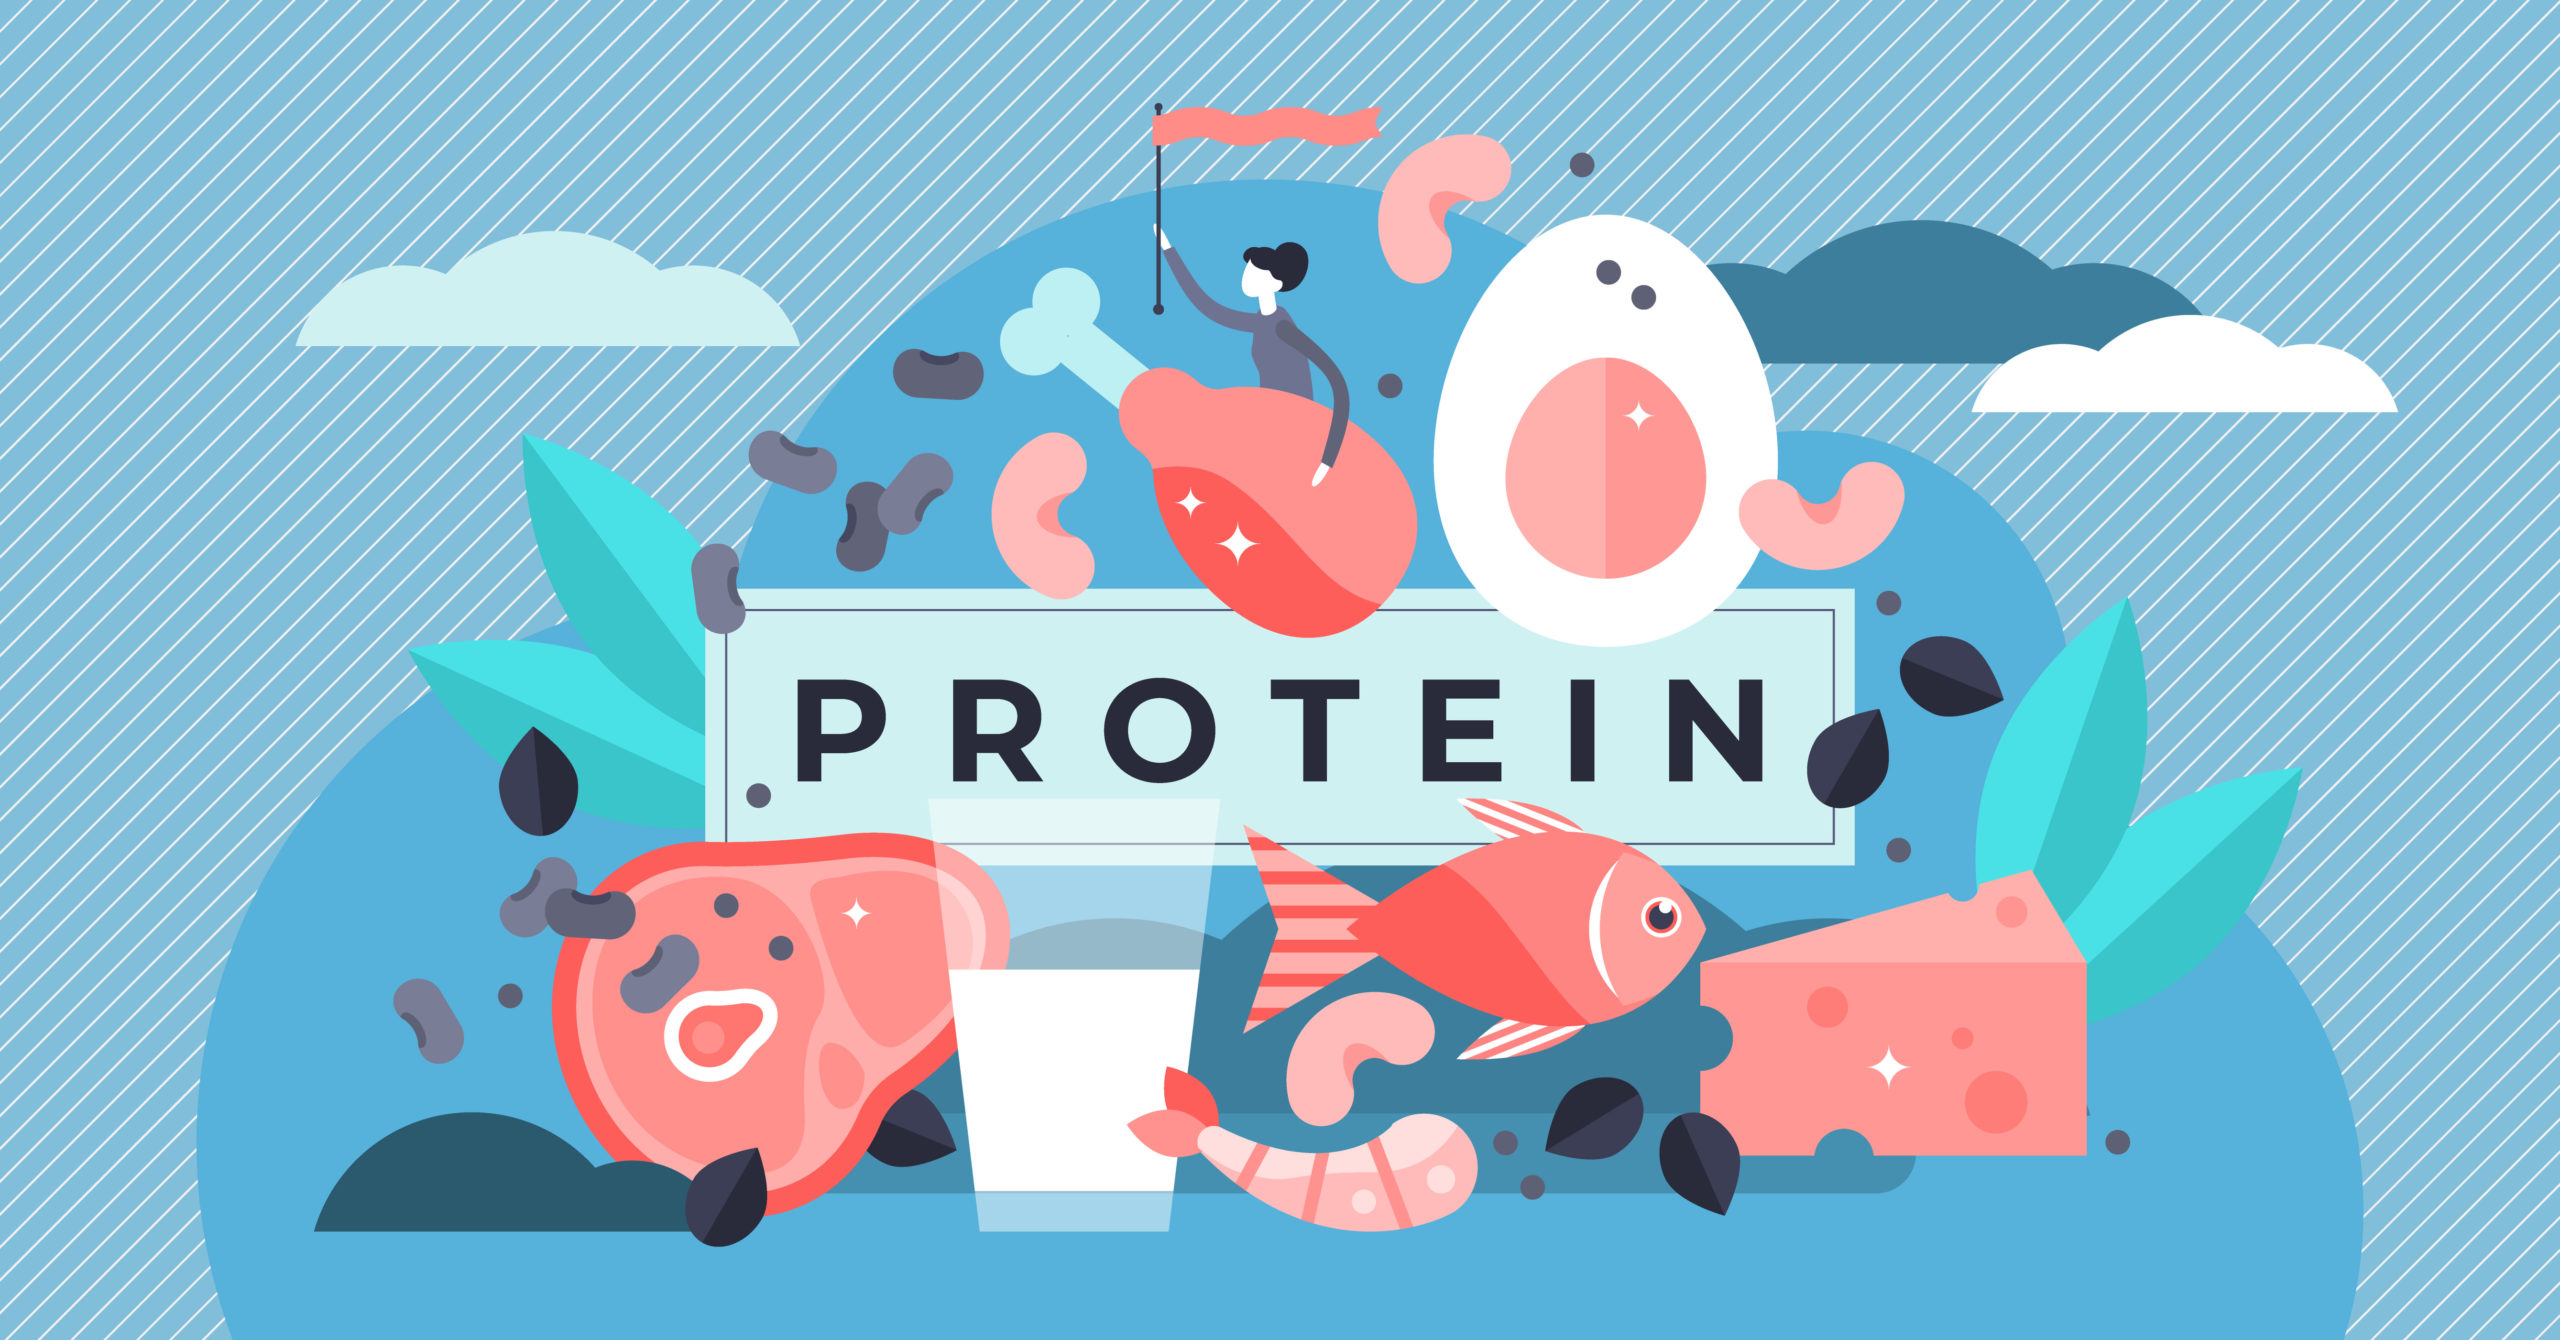 Food - Graphic of high protein food items